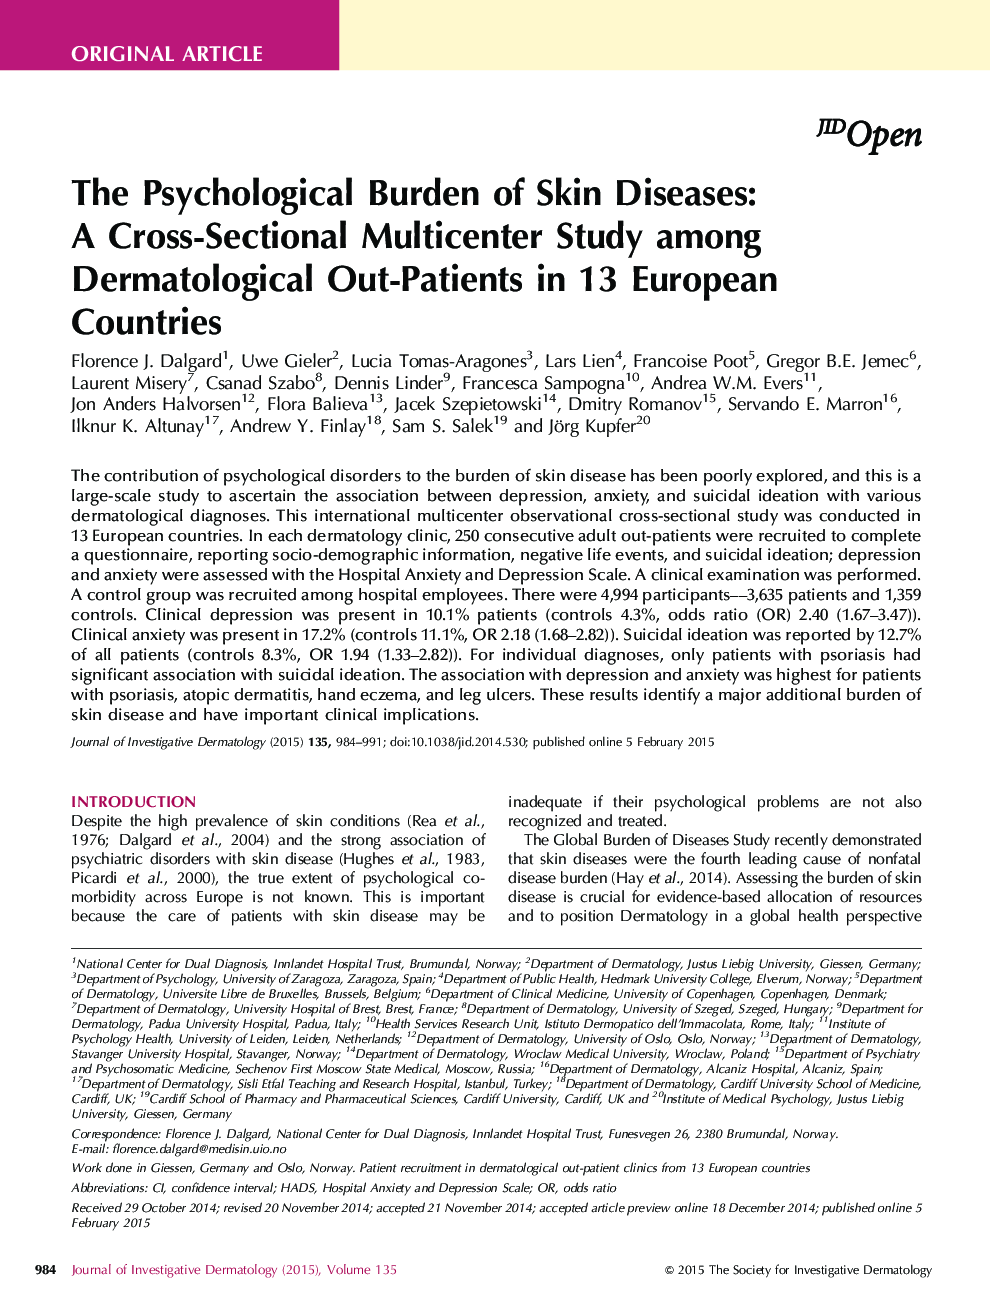 Original ArticleThe Psychological Burden of Skin Diseases: A Cross-Sectional Multicenter Study among Dermatological Out-Patients in 13 European Countries